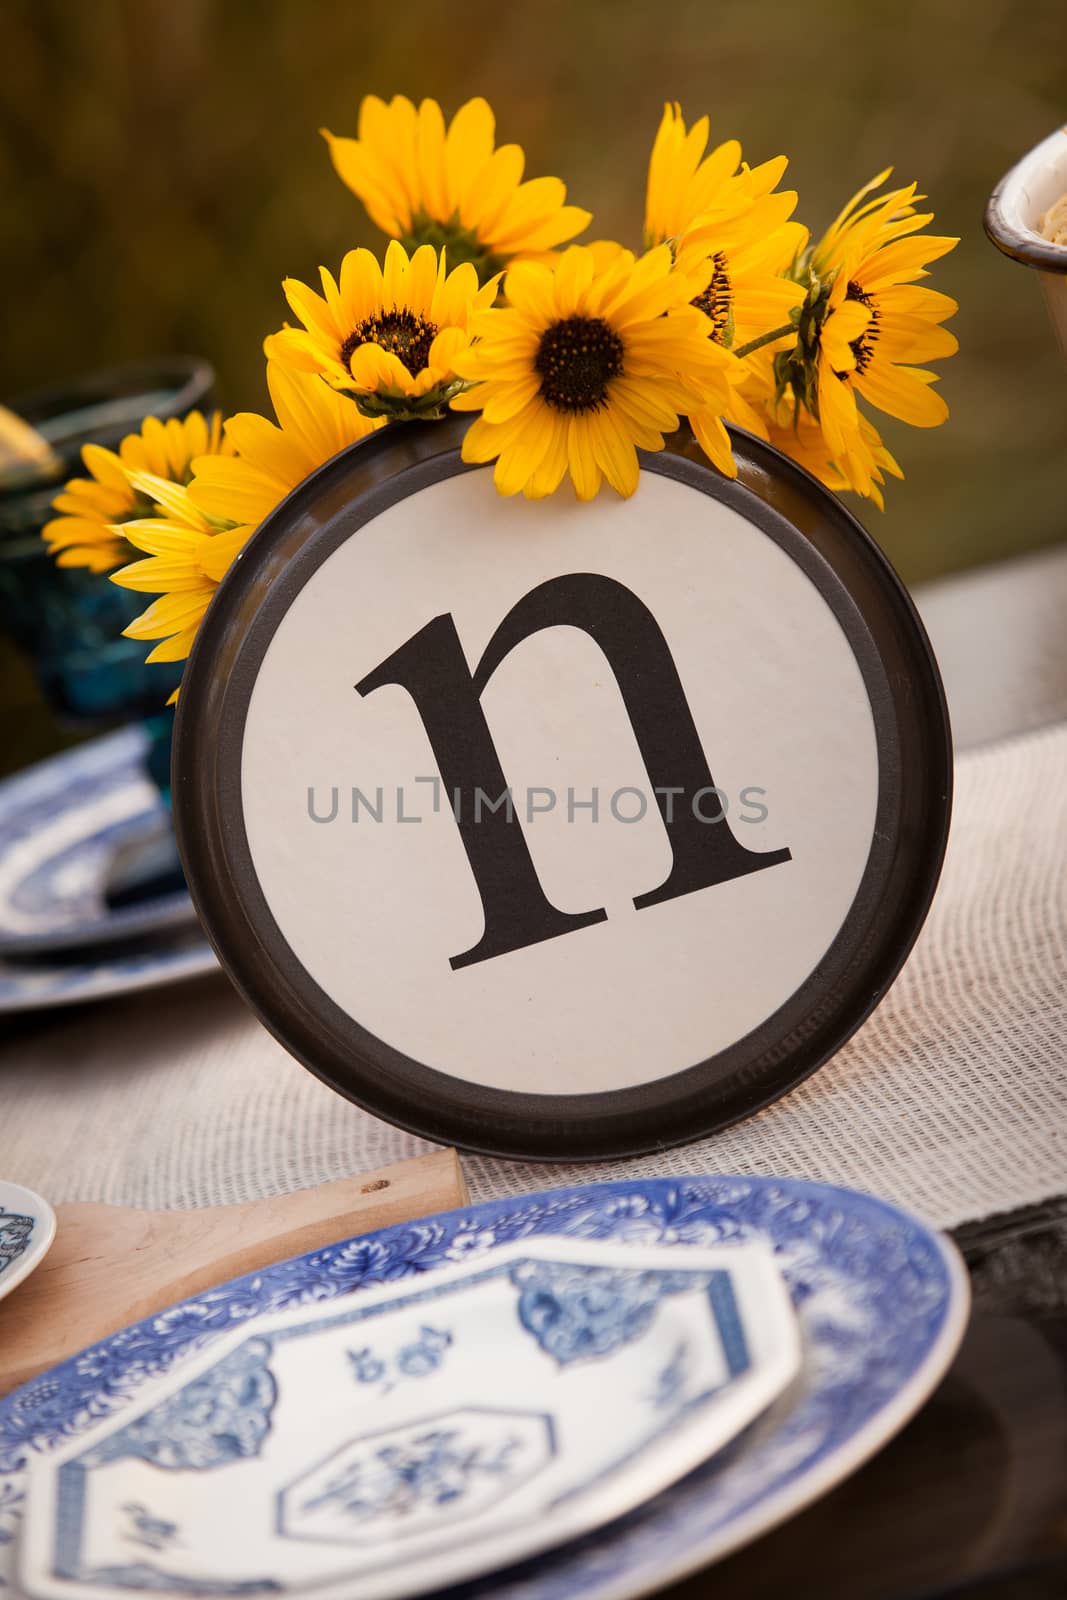 Beautiful rustic table setting with the letter "N" incorporated.